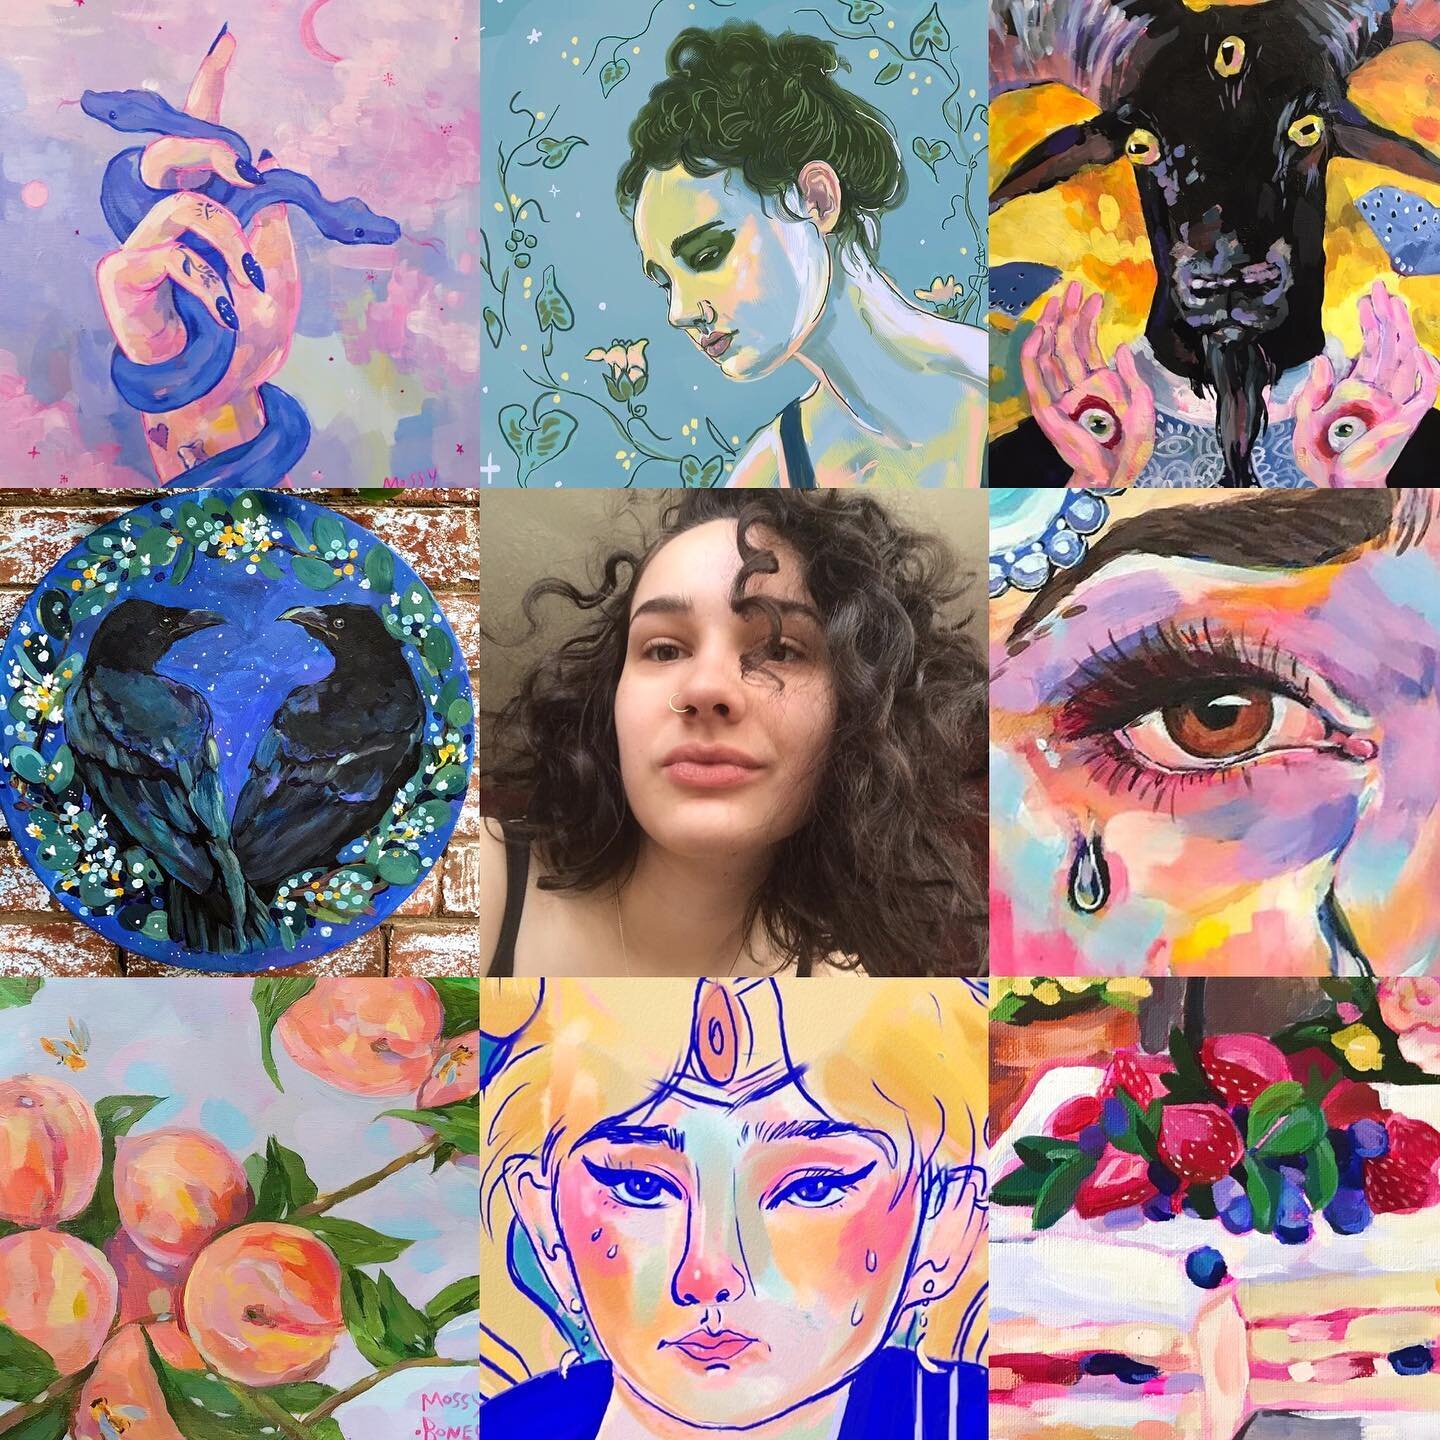 it&rsquo;s #artvsartist2020 for me! i thought i did nothing this year but actually these paintings are nice i think!
.
.
.
.

#instaart #instaartist #acrylicpainting #painting #torontoartist #horrorart #popsurrealism #paintingdetail #portraitpainting